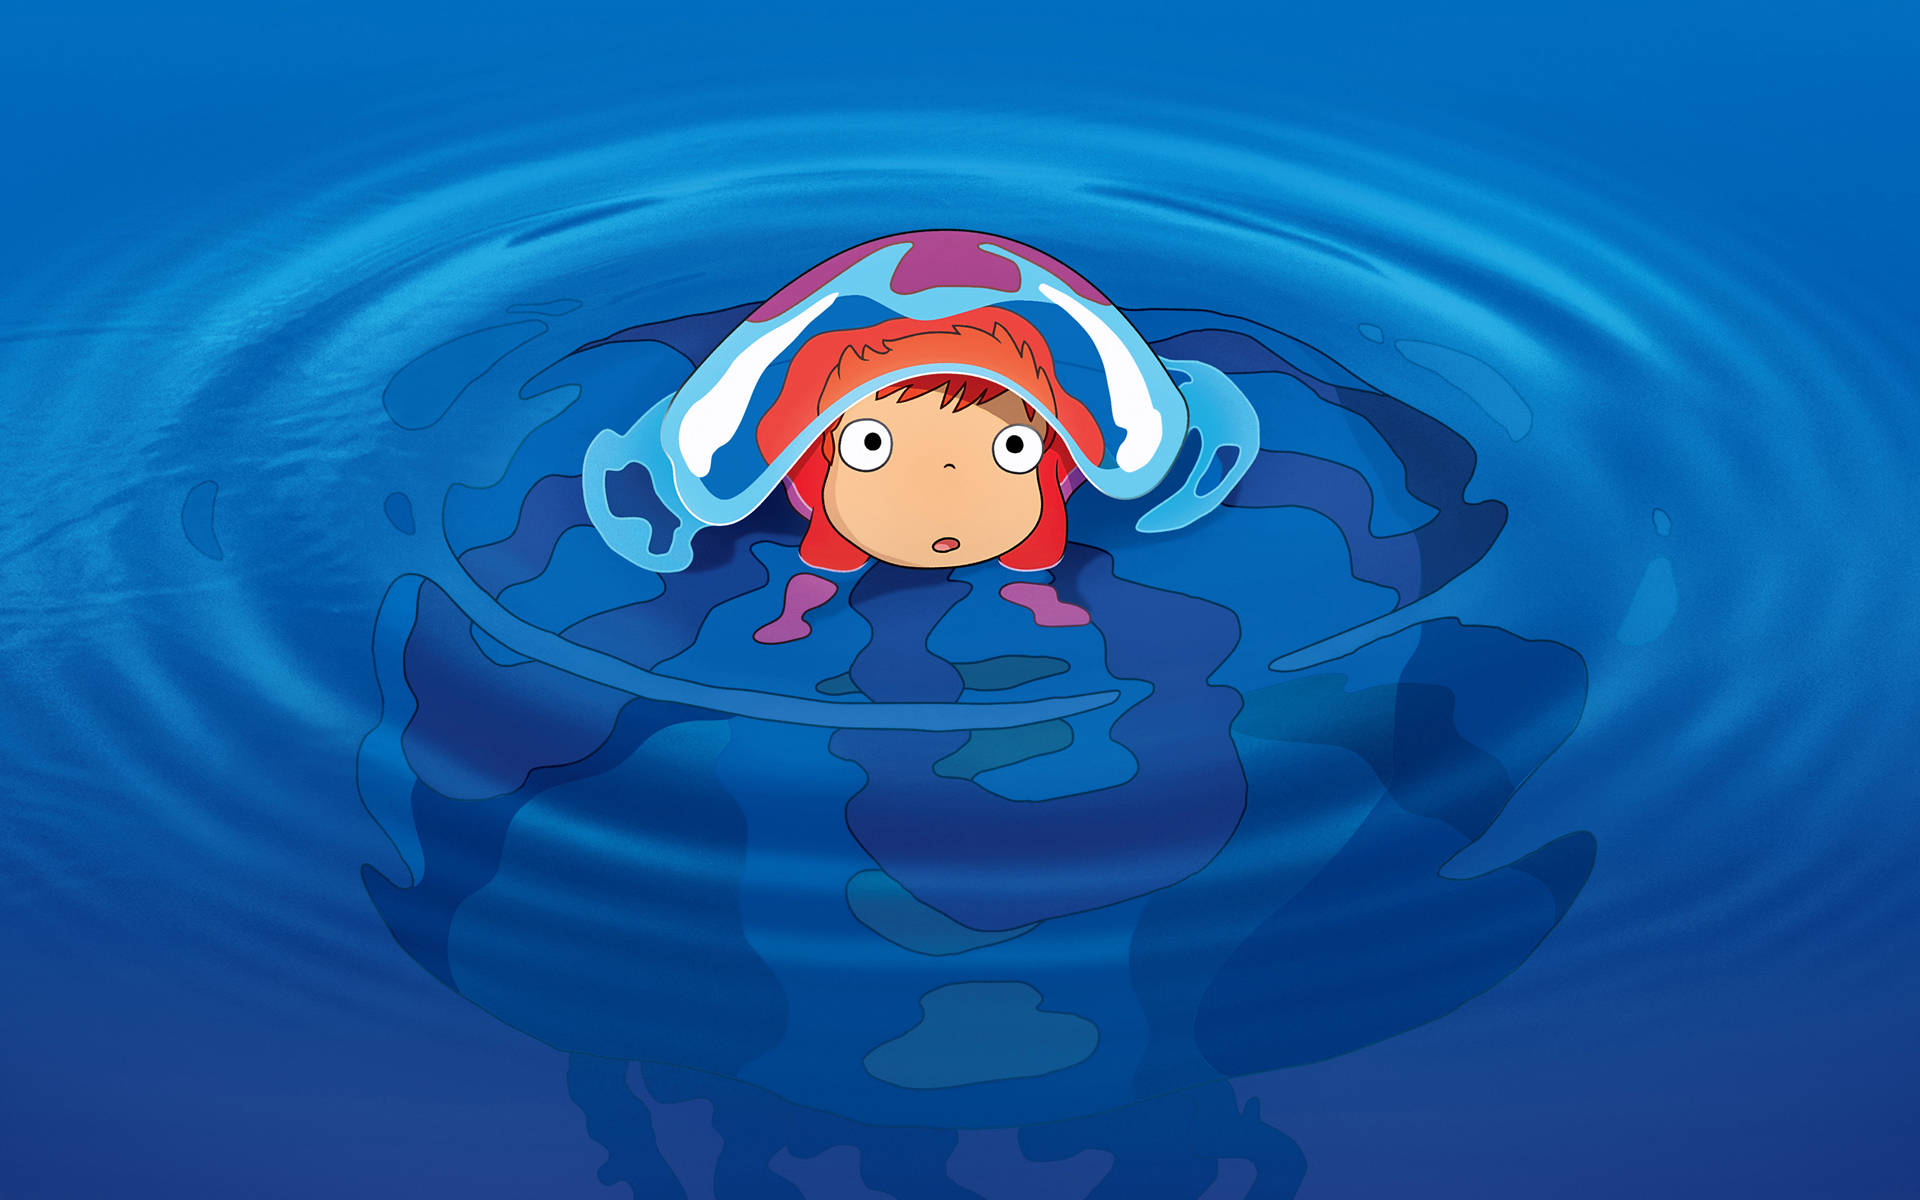 Top 999+ Ponyo Wallpapers Full HD, 4K✅Free to Use